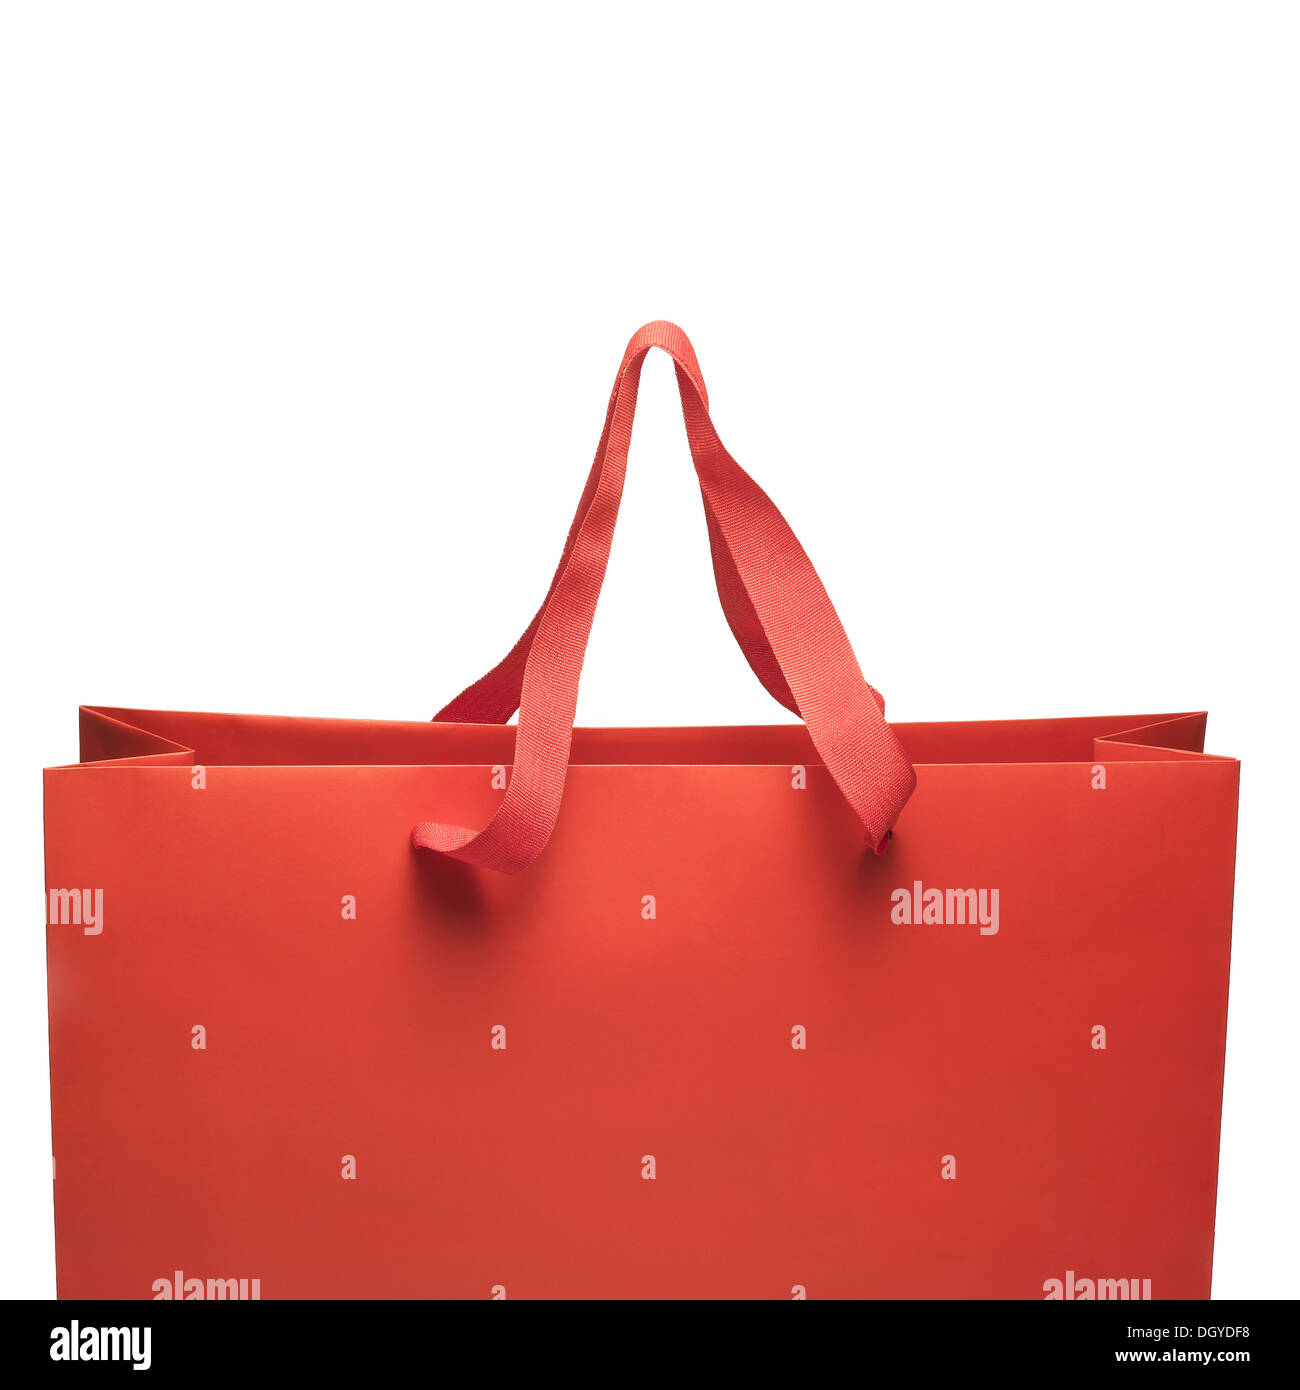 Shopping bag close up view opened Stock Photo